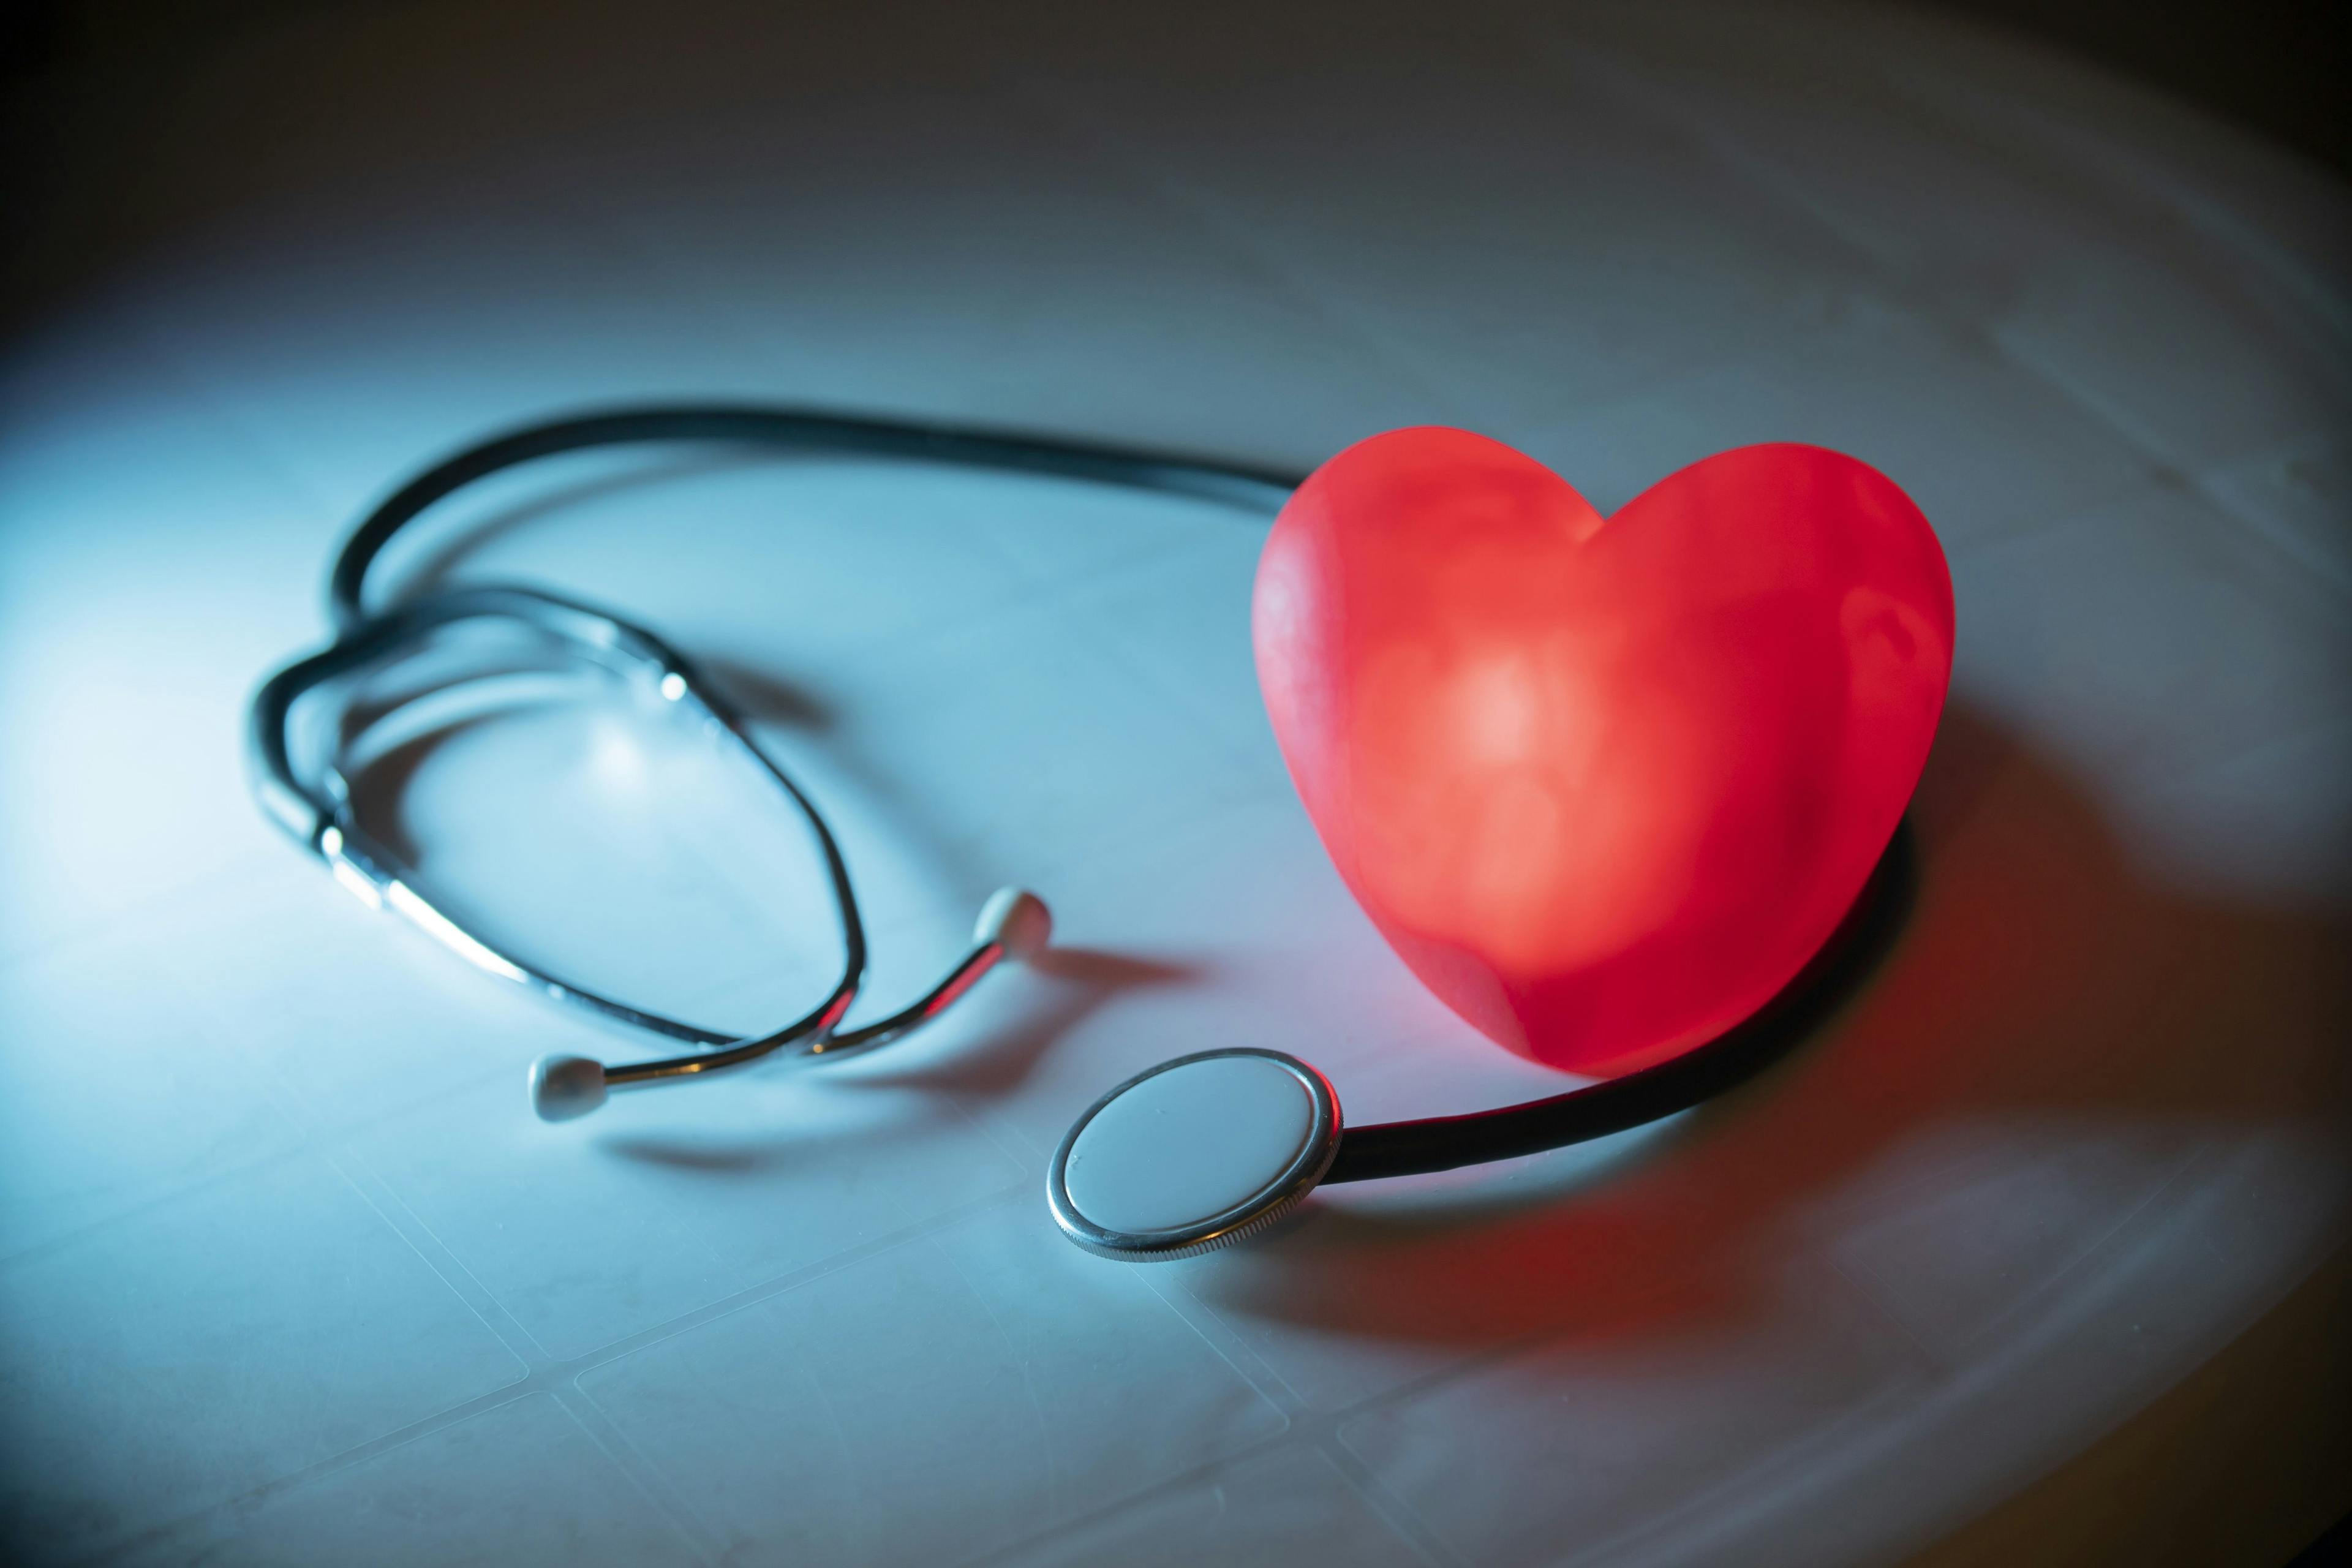 On Valentine’s Day, a look at love, marriage and medicine